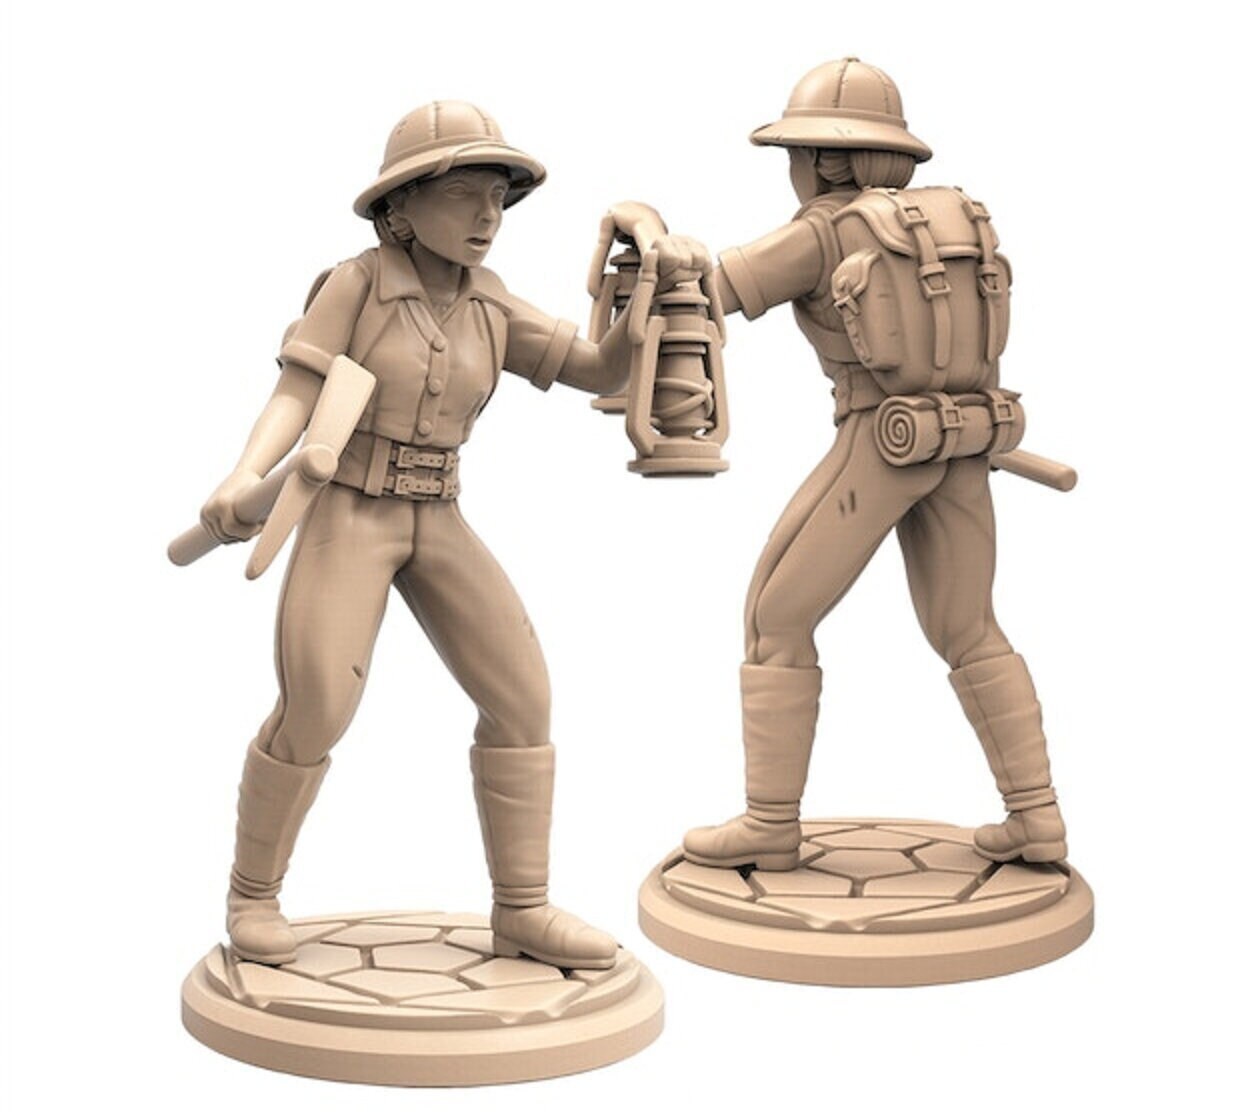 Archeologist Miniature - Adaevy Creations - 28mm / 32mm / 36mm